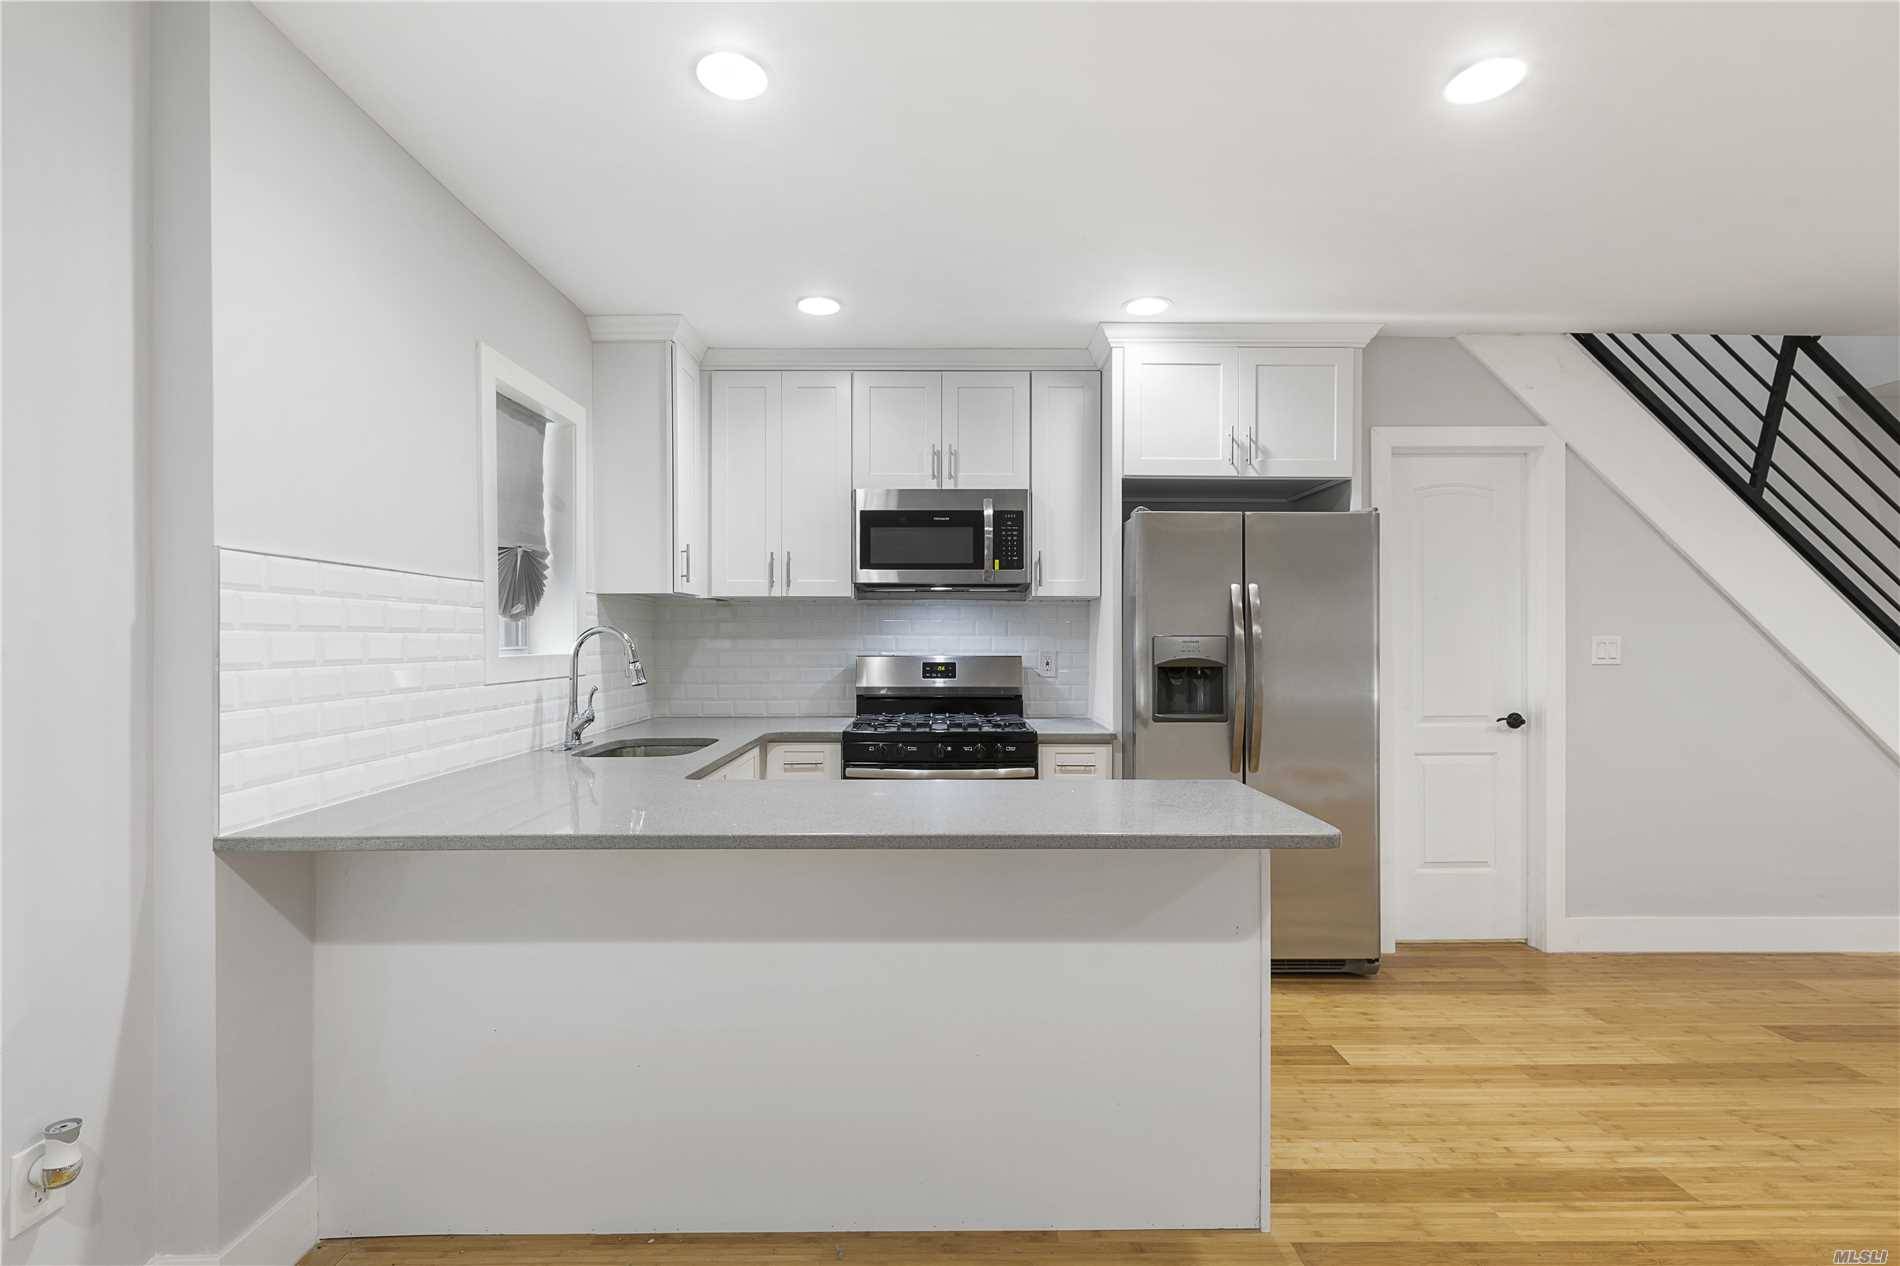 Welcome To The Beautiful Fully Renovated 4 Bedroom 2 1 2 Bathroom With A Fully Finished Basement !